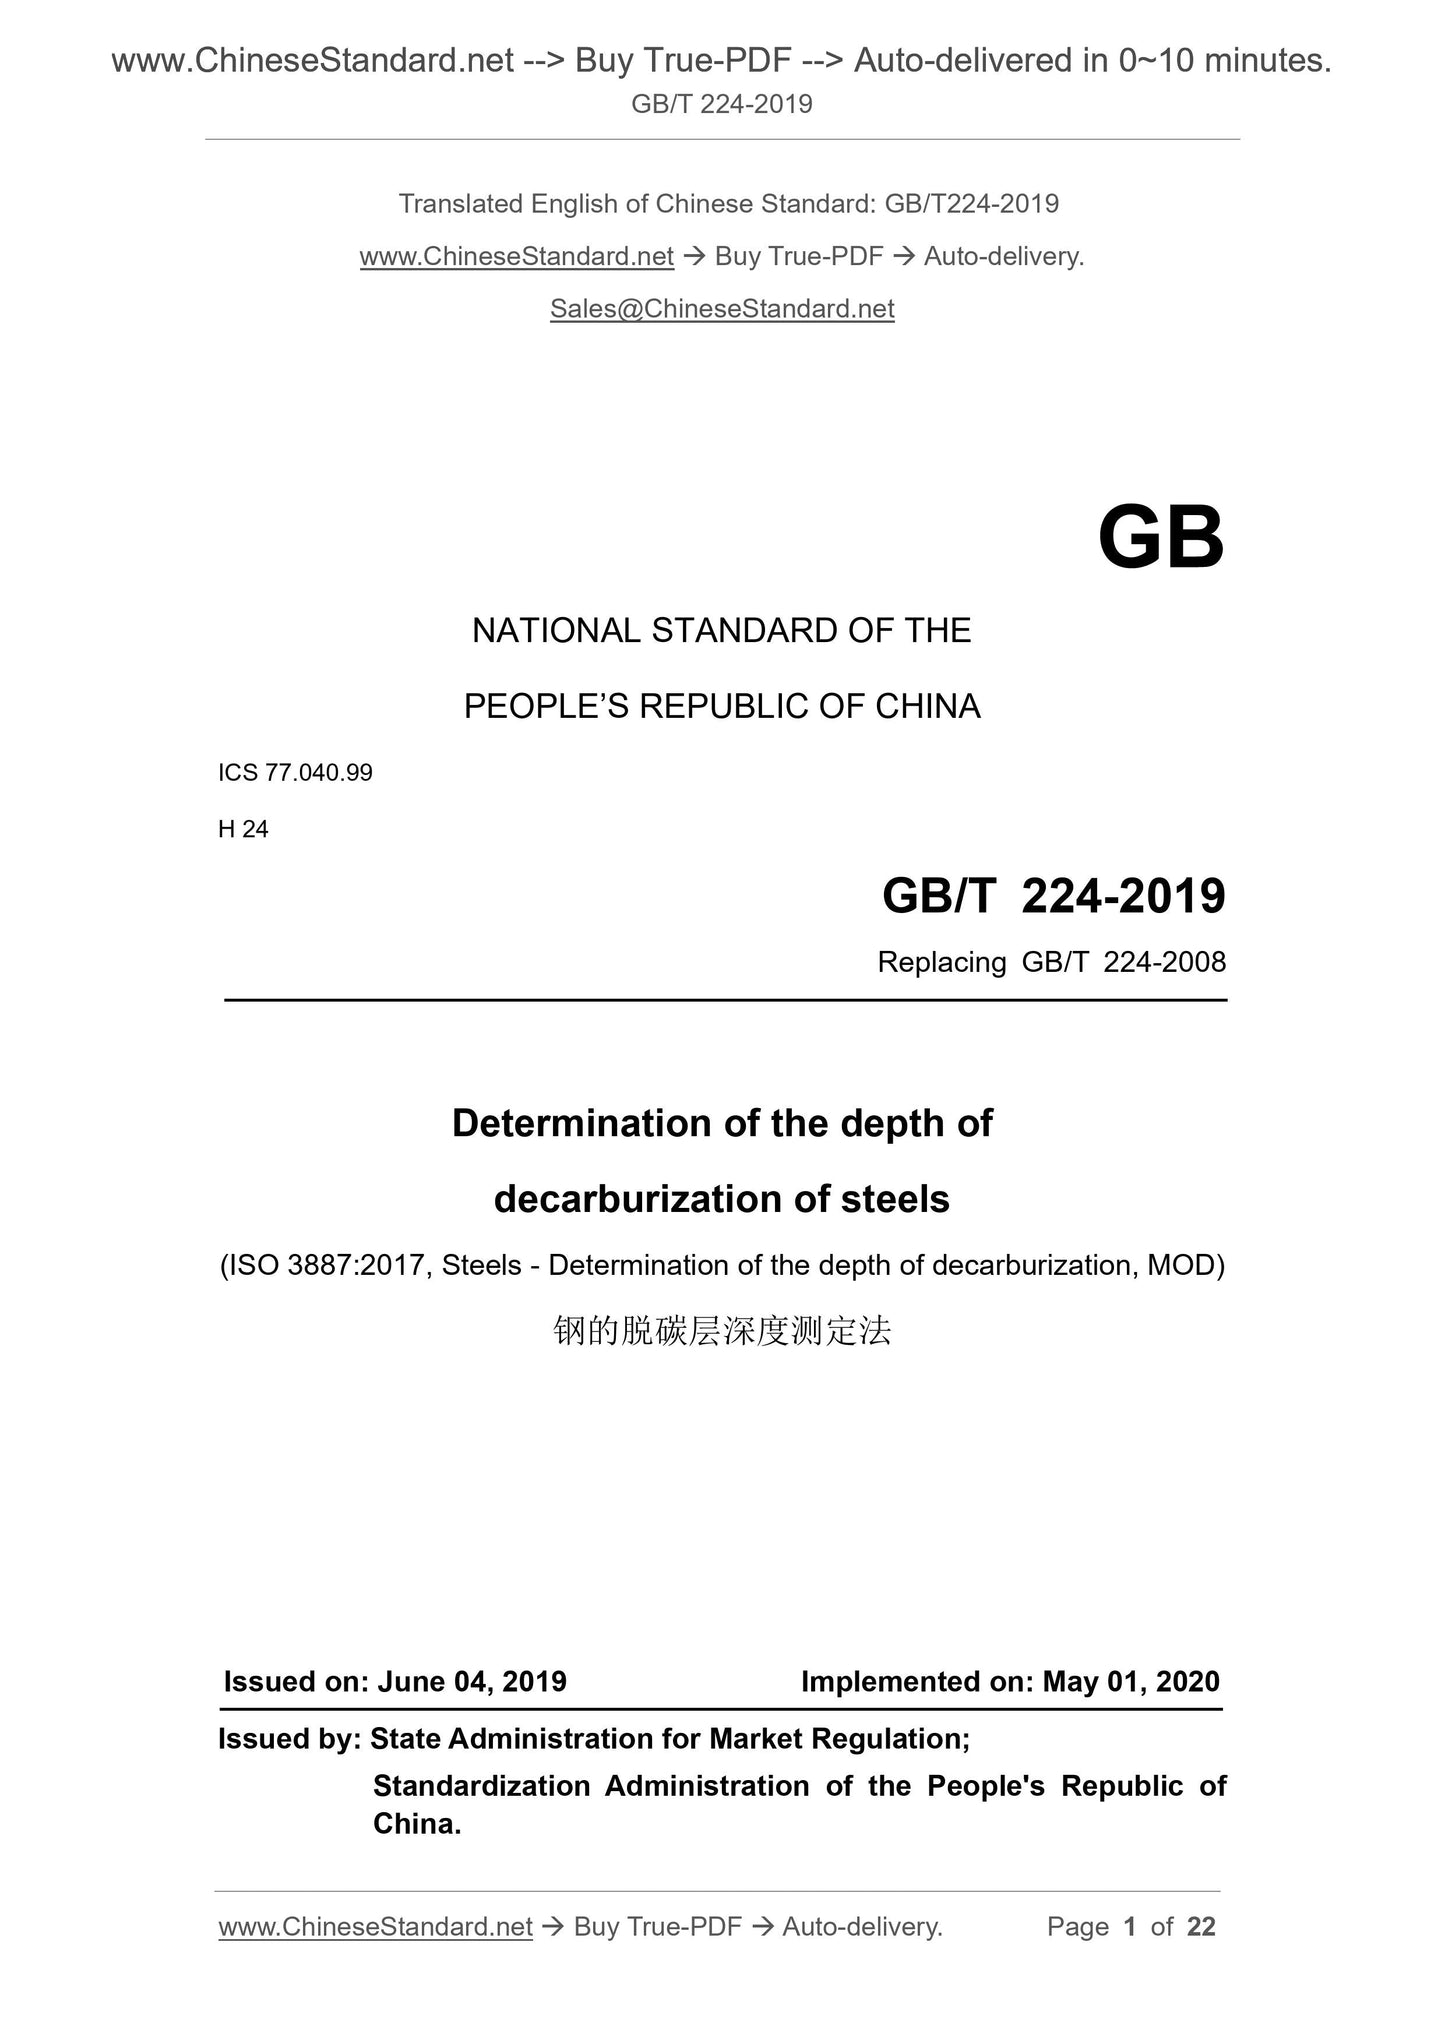 GB/T 224-2019 Page 1